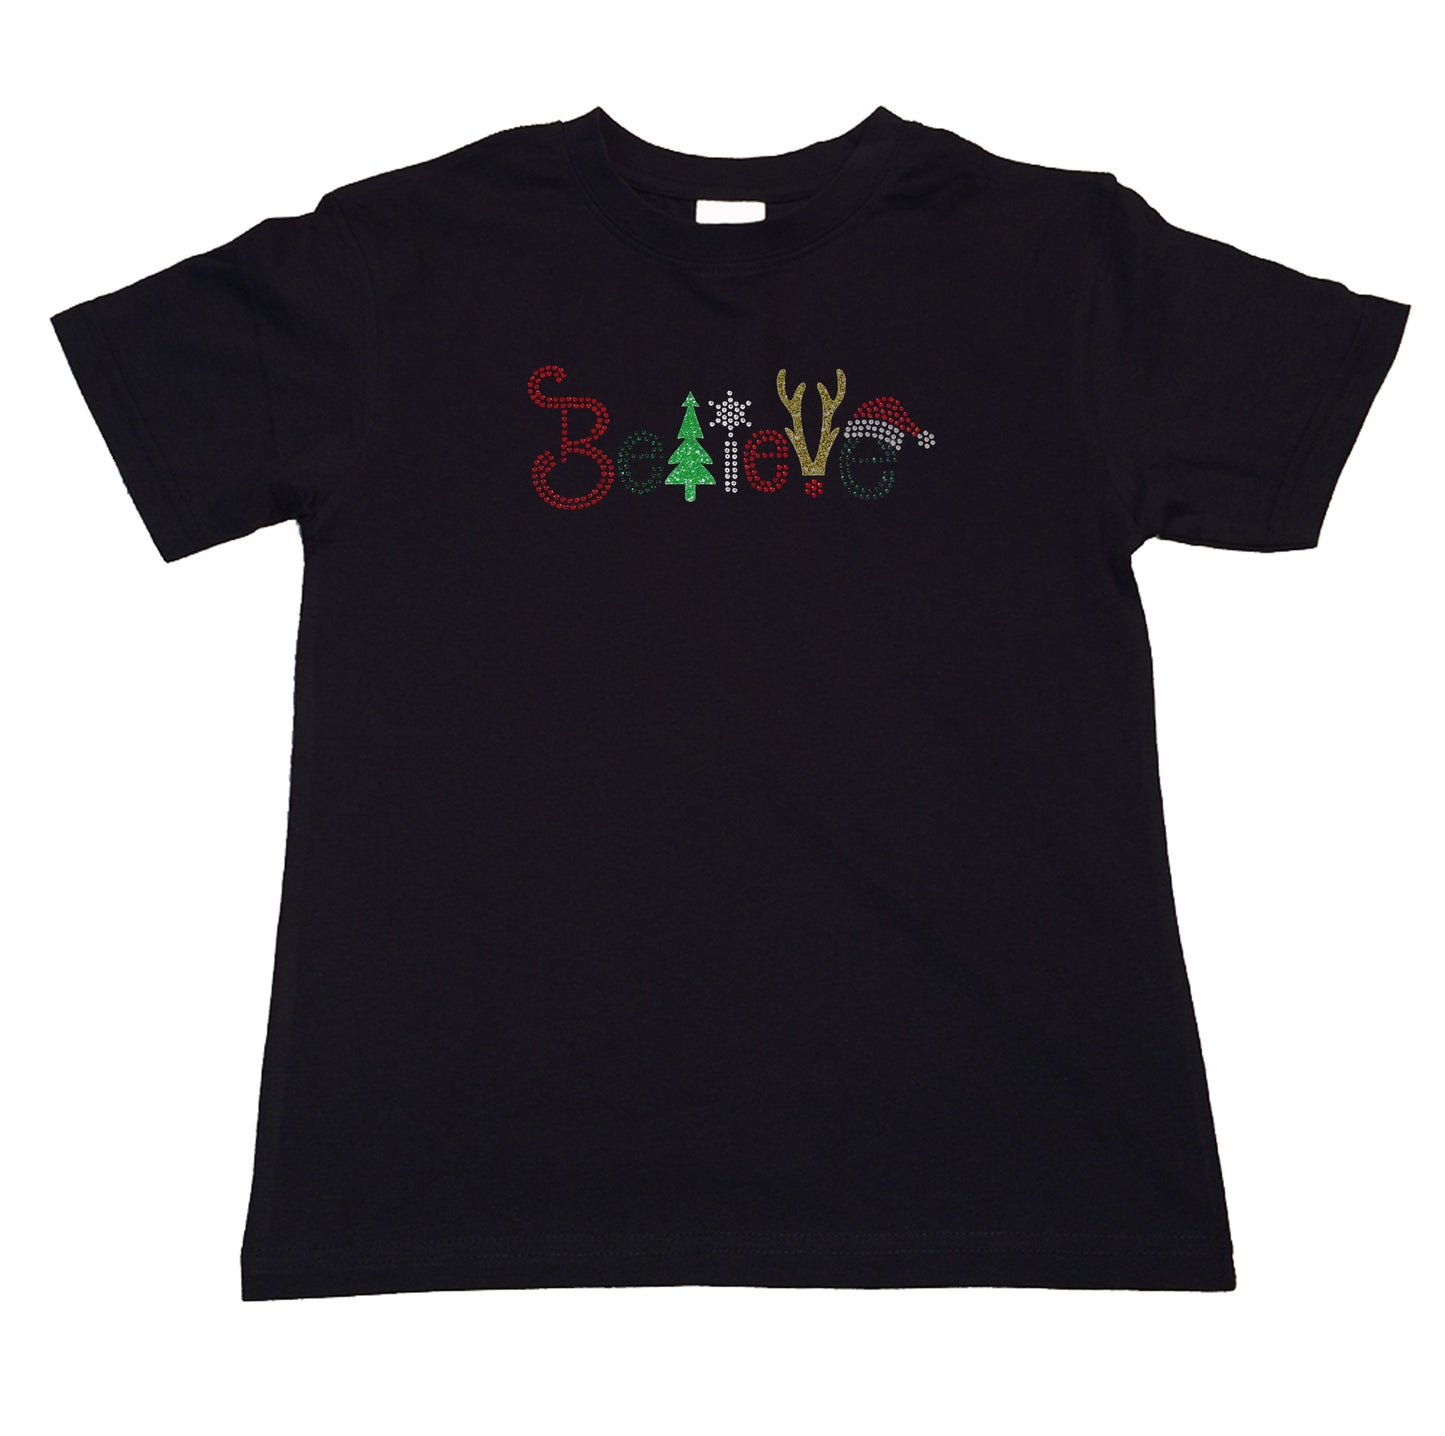 Girls Rhinestone T-Shirt " Christmas Believe in Glitters and Rhinestones " Kids Size 3 to 14 Available